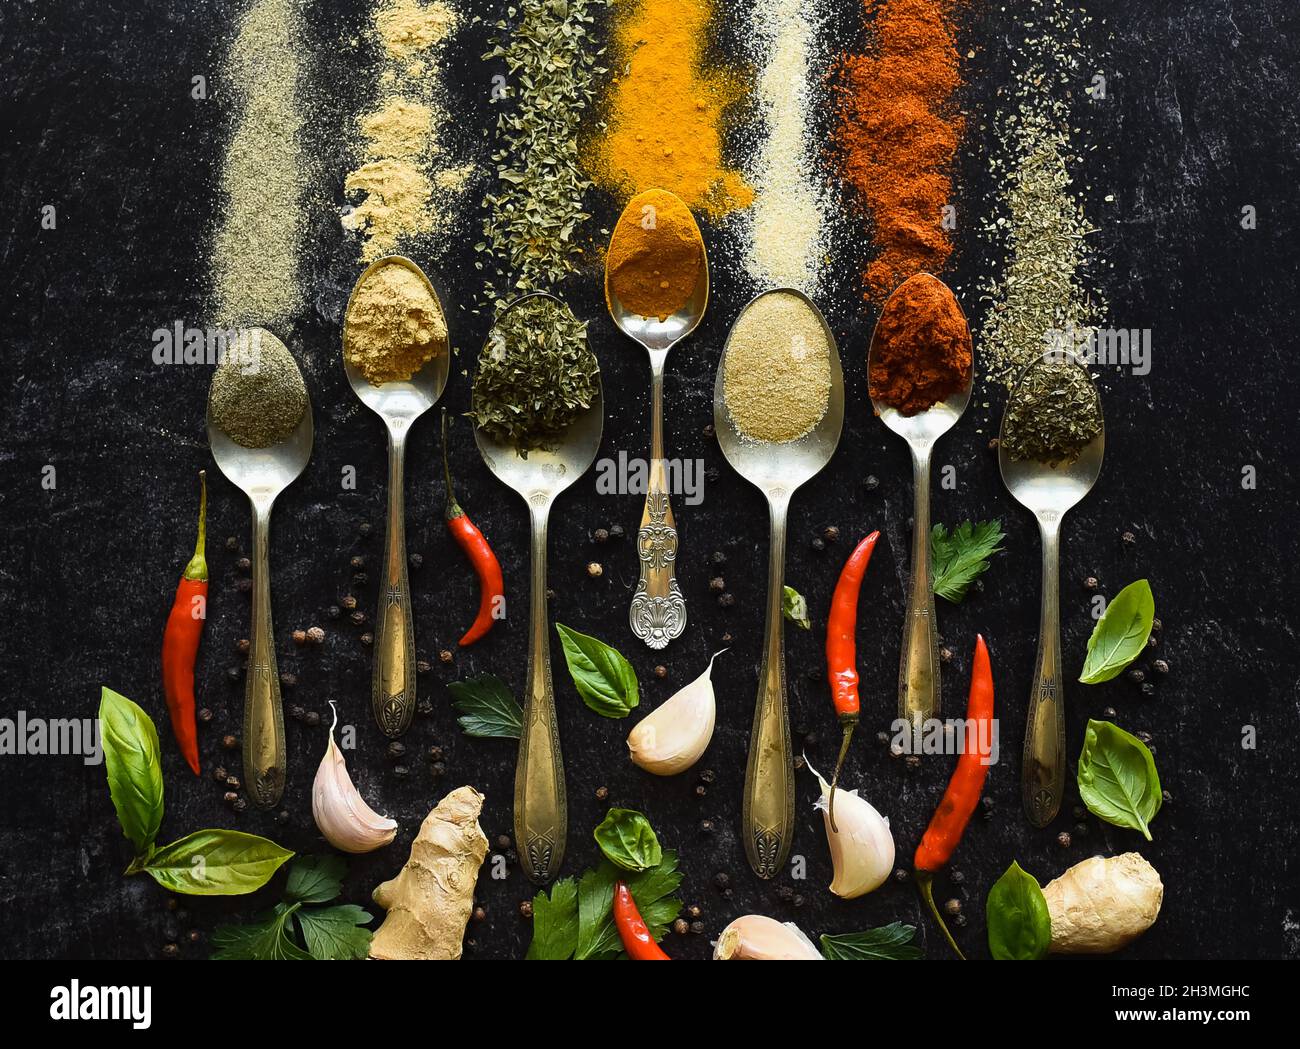 https://c8.alamy.com/comp/2H3MGHC/overhead-of-spoons-full-of-herbs-and-spices-on-a-black-background-2H3MGHC.jpg